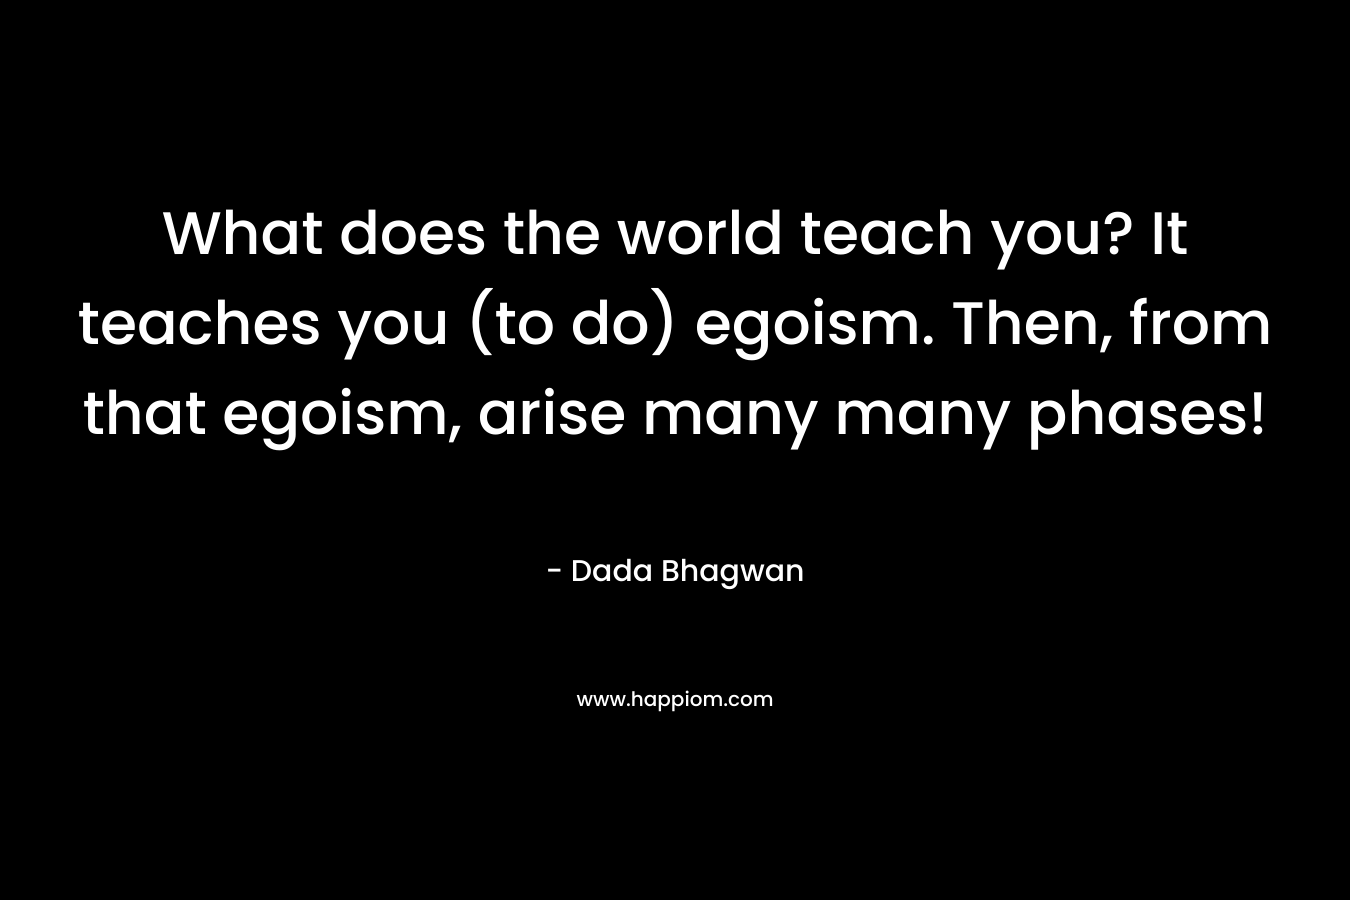 What does the world teach you? It teaches you (to do) egoism. Then, from that egoism, arise many many phases!